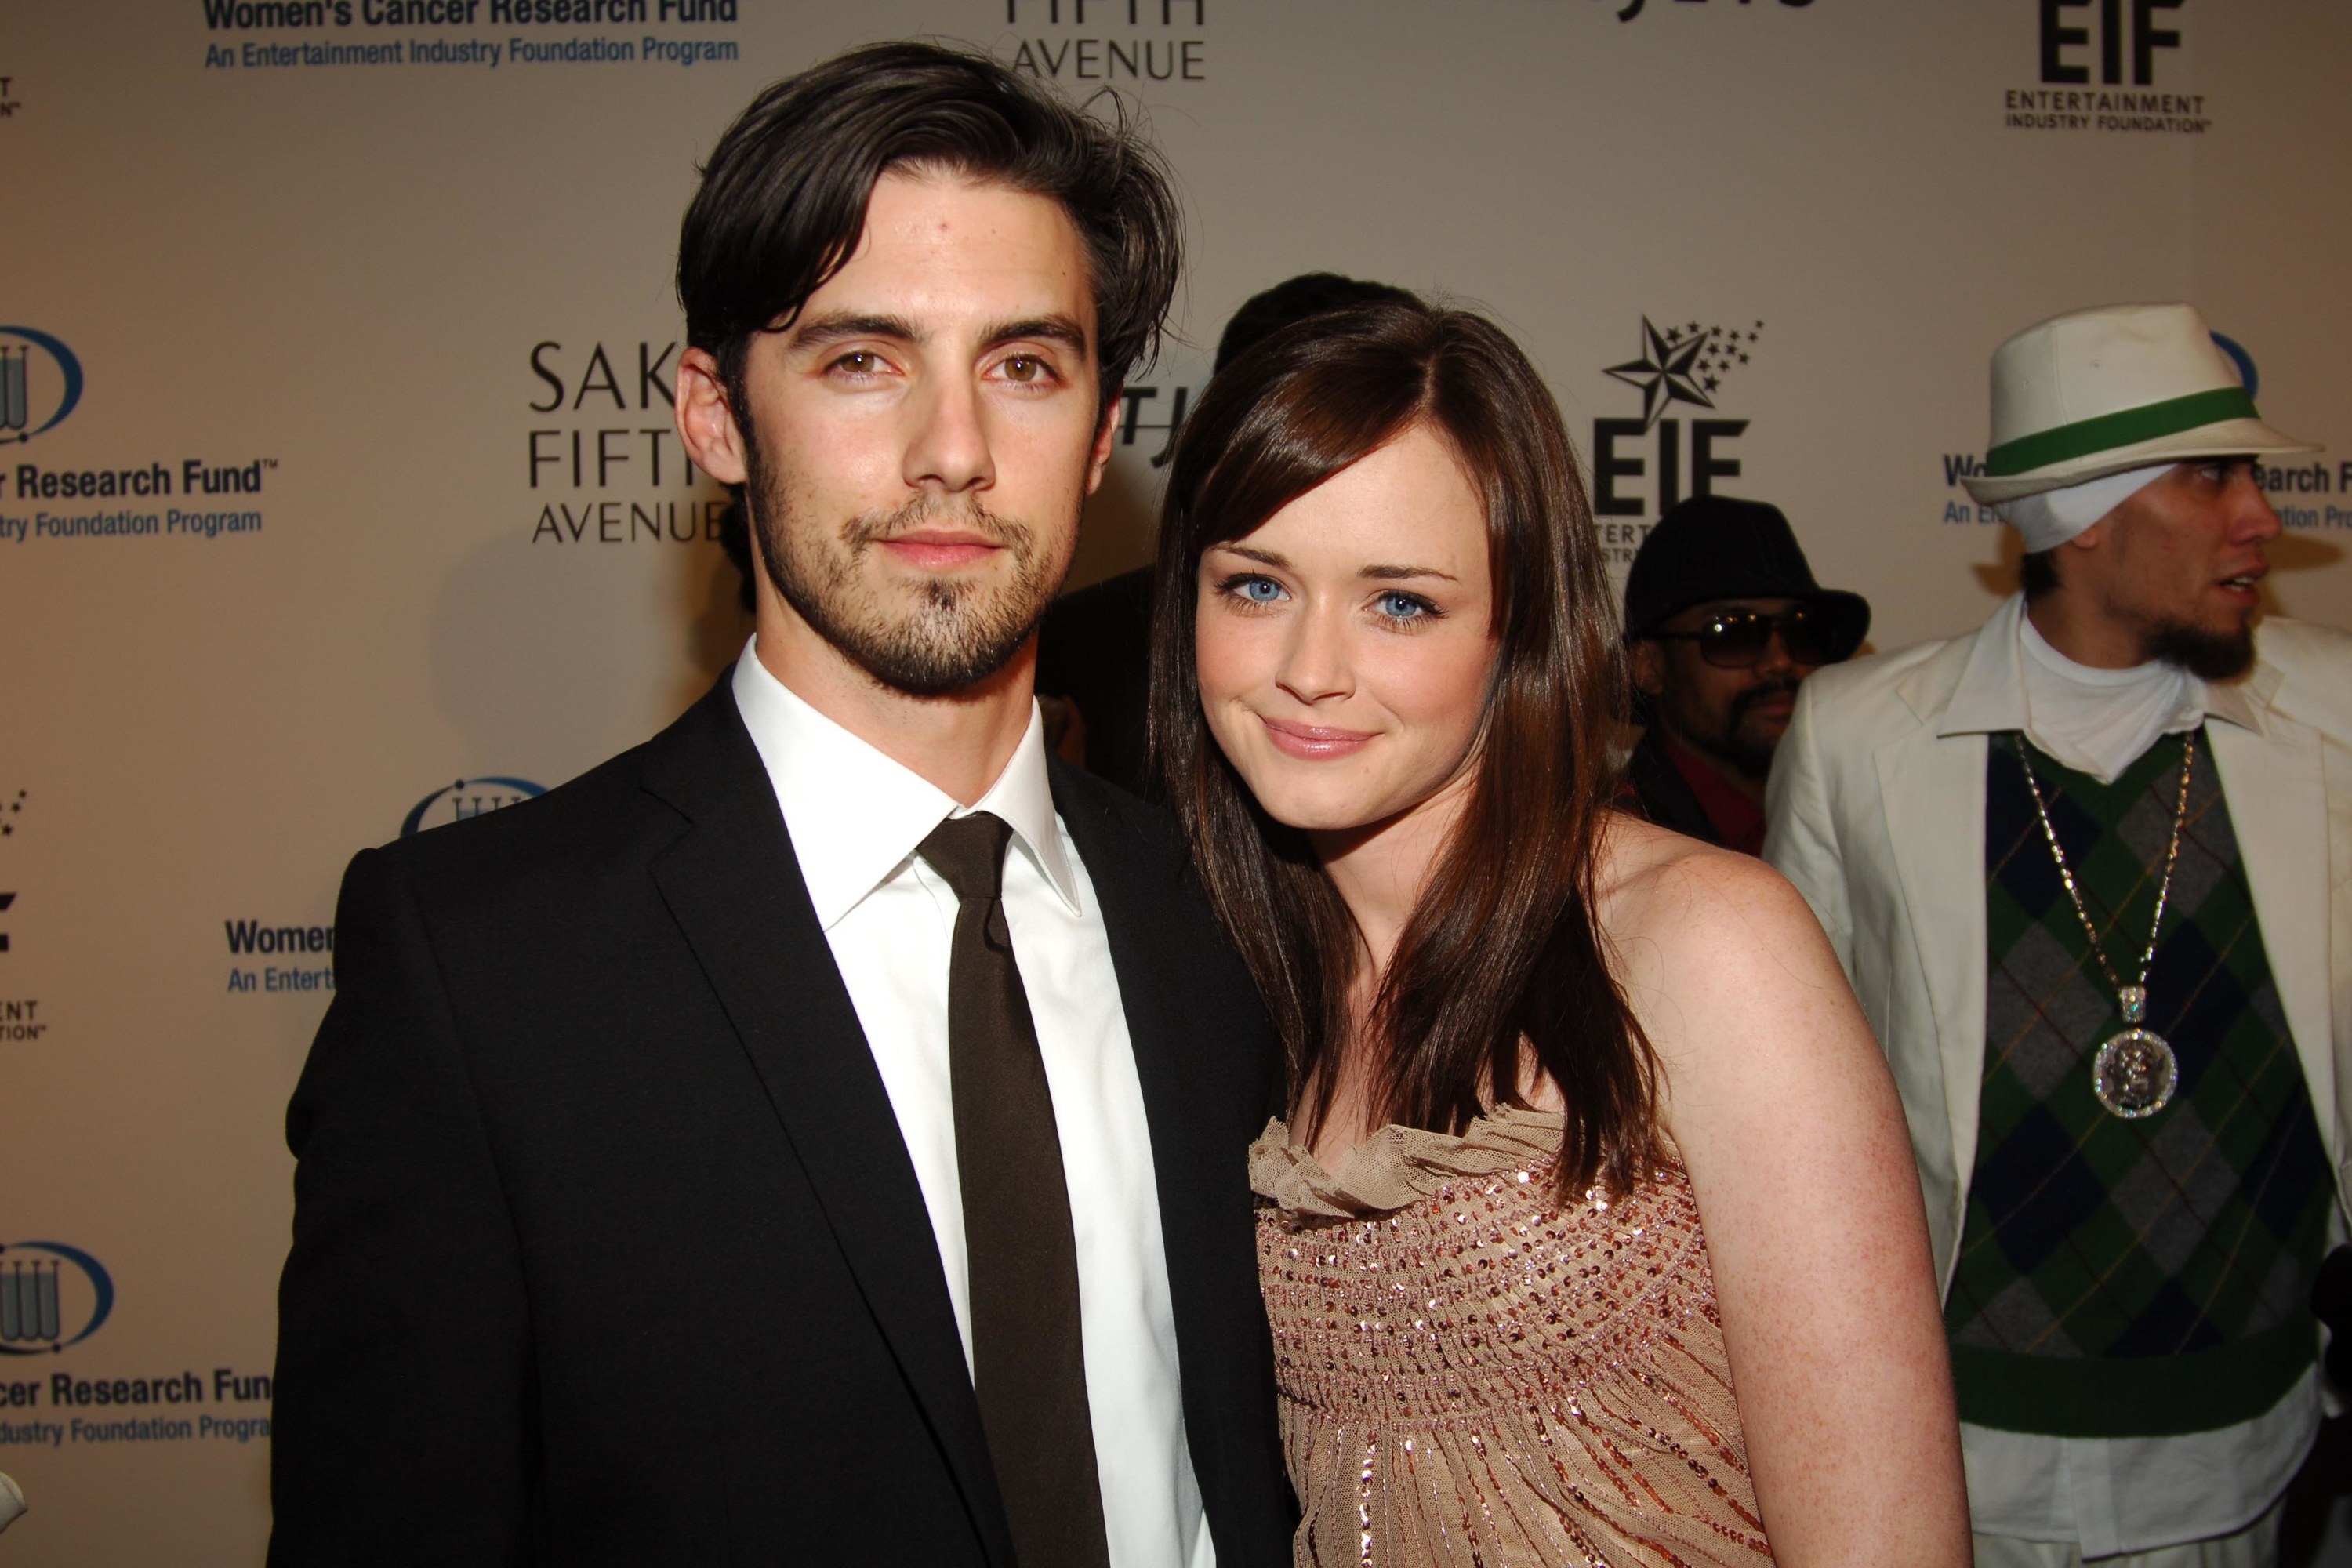 Or when Alexis Bledel and Milo Ventimiglia dated from 2002-2006? 